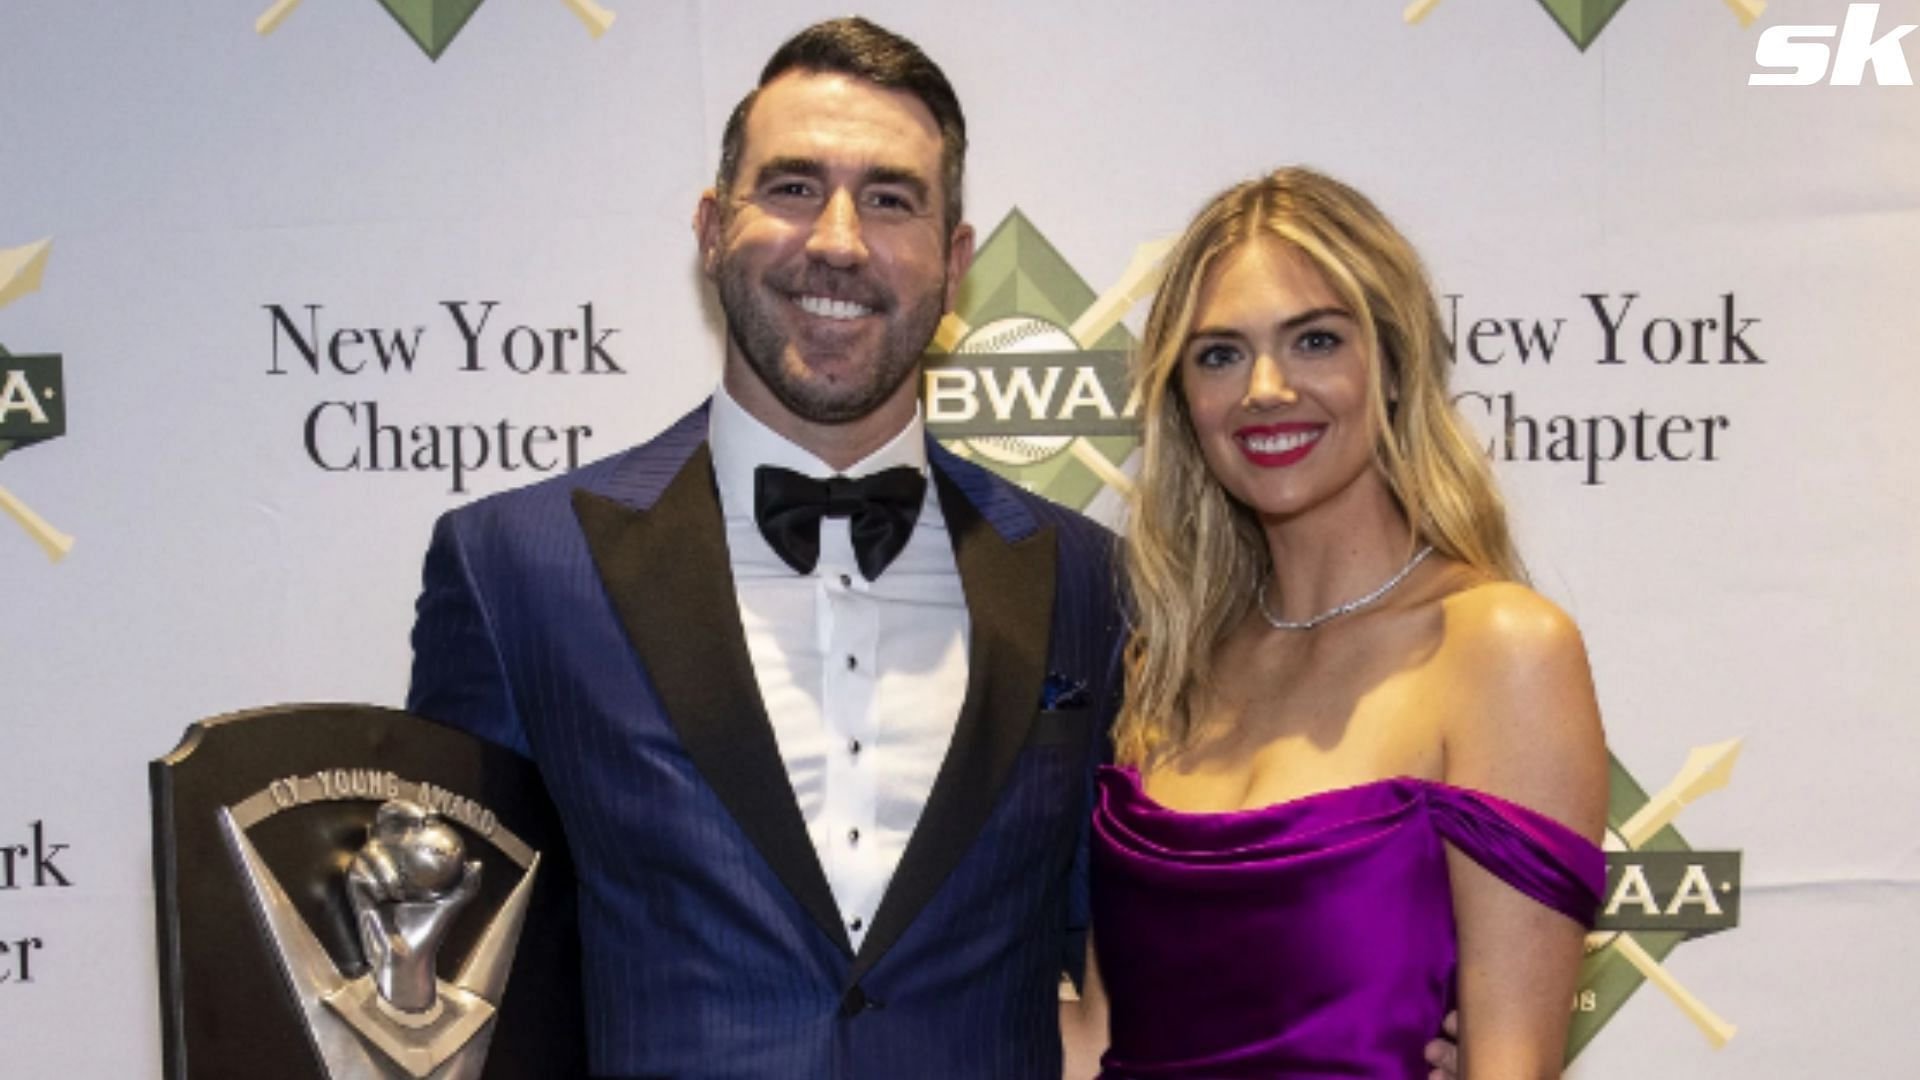 Kate Upton 'all dressed up' for hubby Justin Verlander's honor